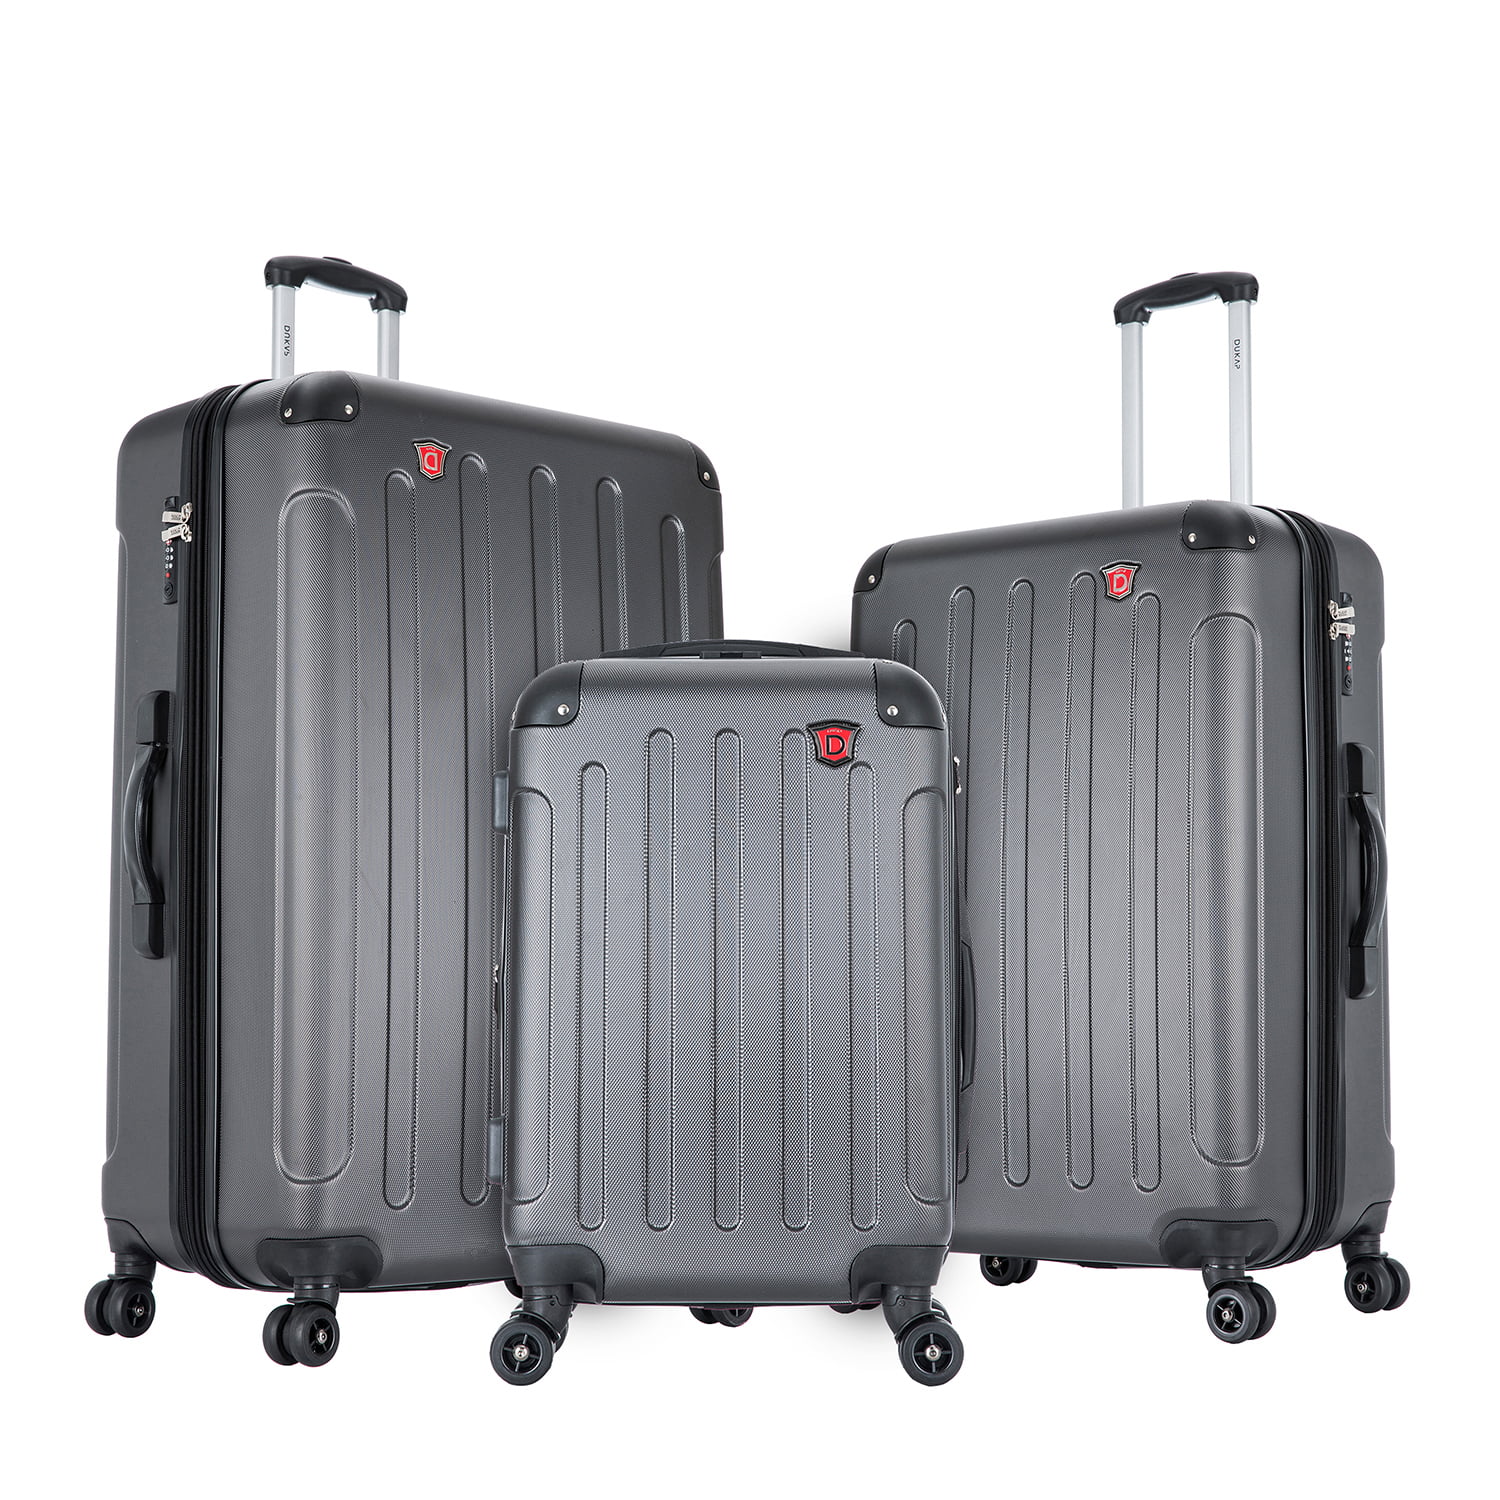 Dukap Intely Smart 3pc Hardside Checked Luggage Set With Integrated Weight  Scale And Usb Port : Target